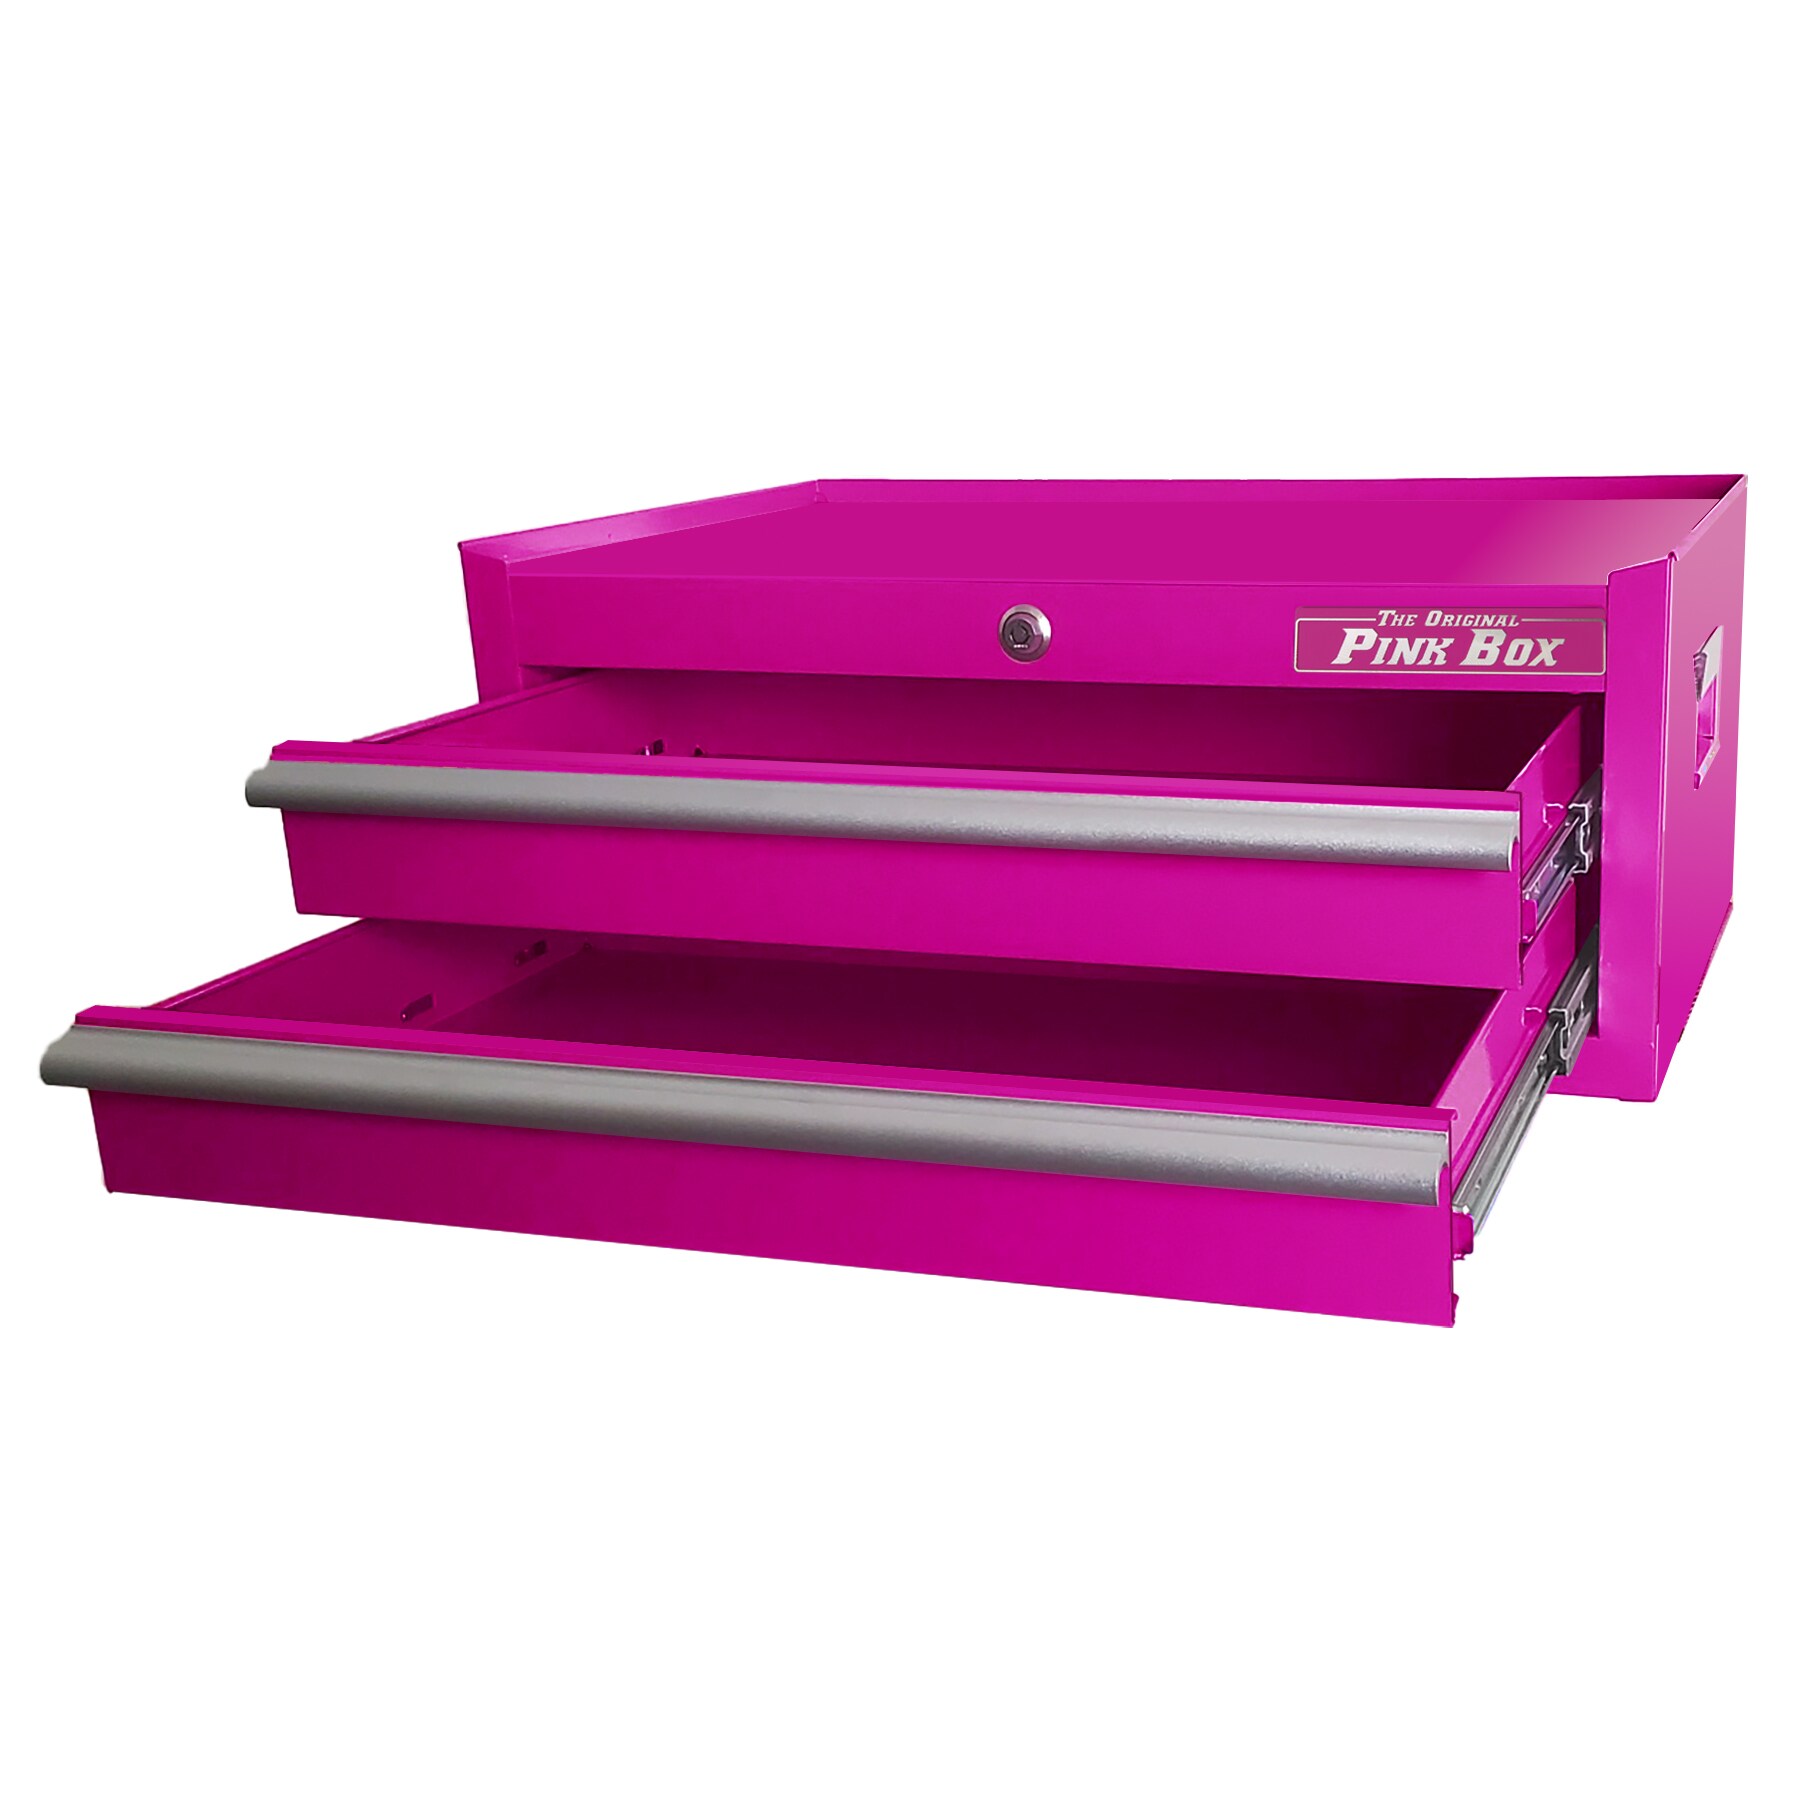 pink tool box from lowes makeup｜TikTok Search